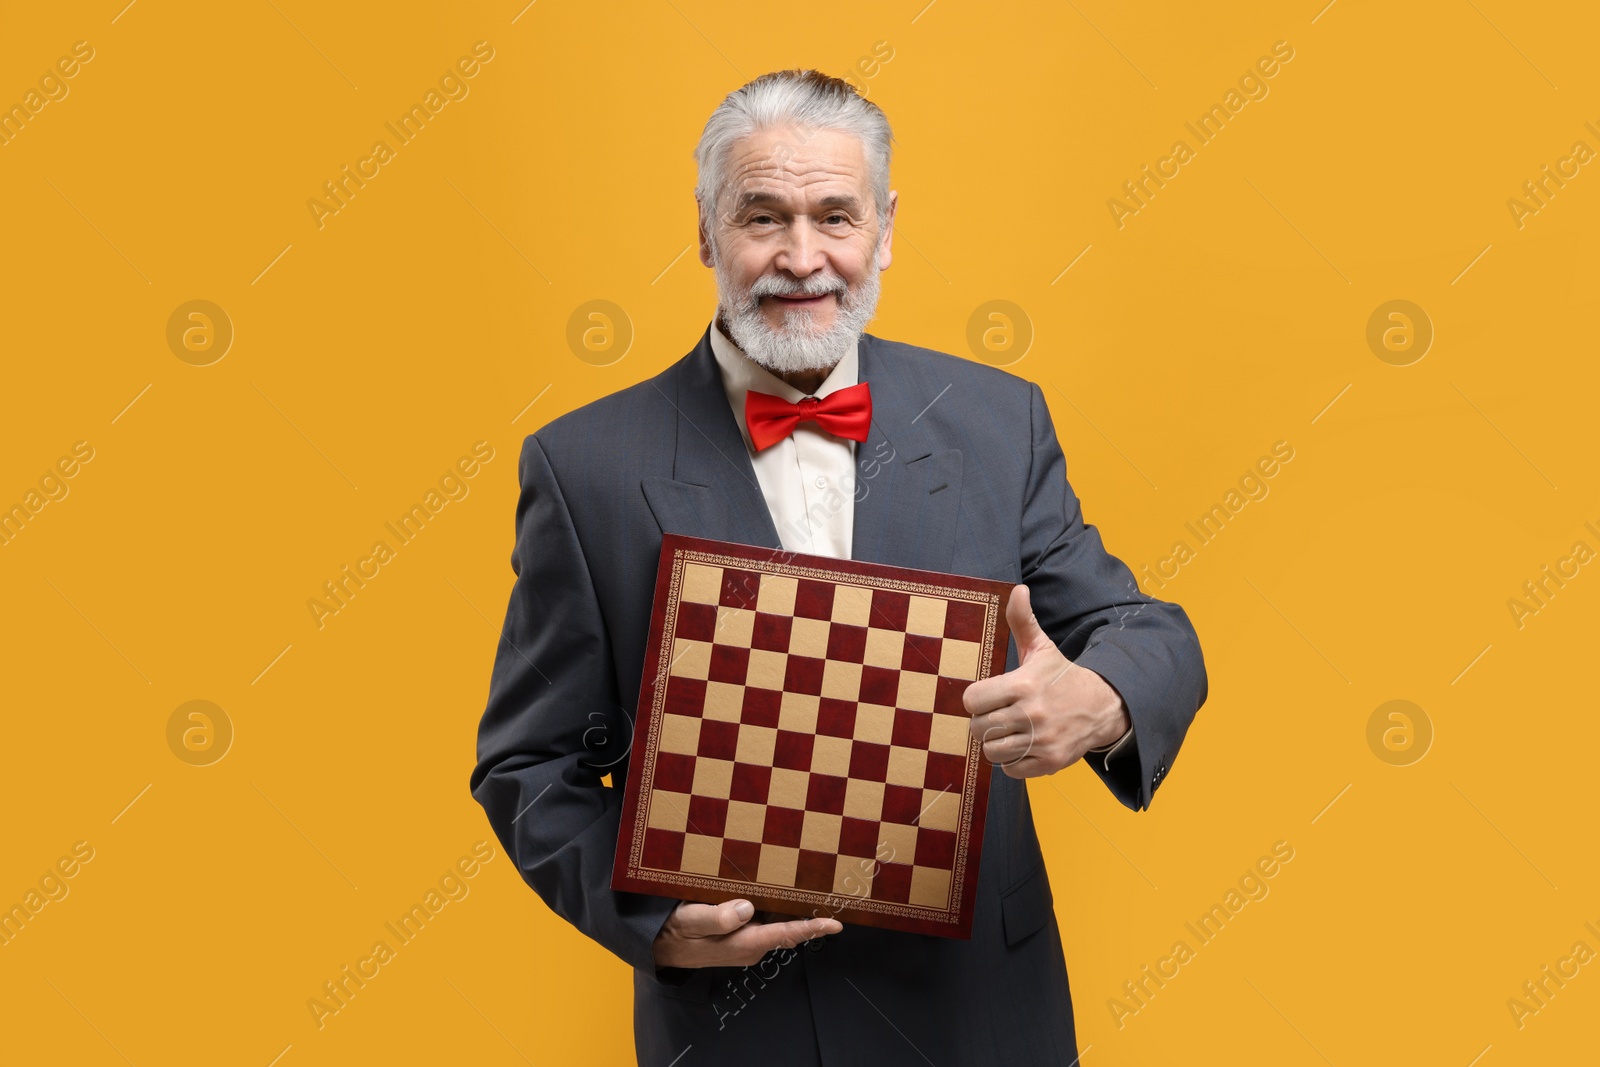 Photo of Man with chessboard showing thumbs up on orange background